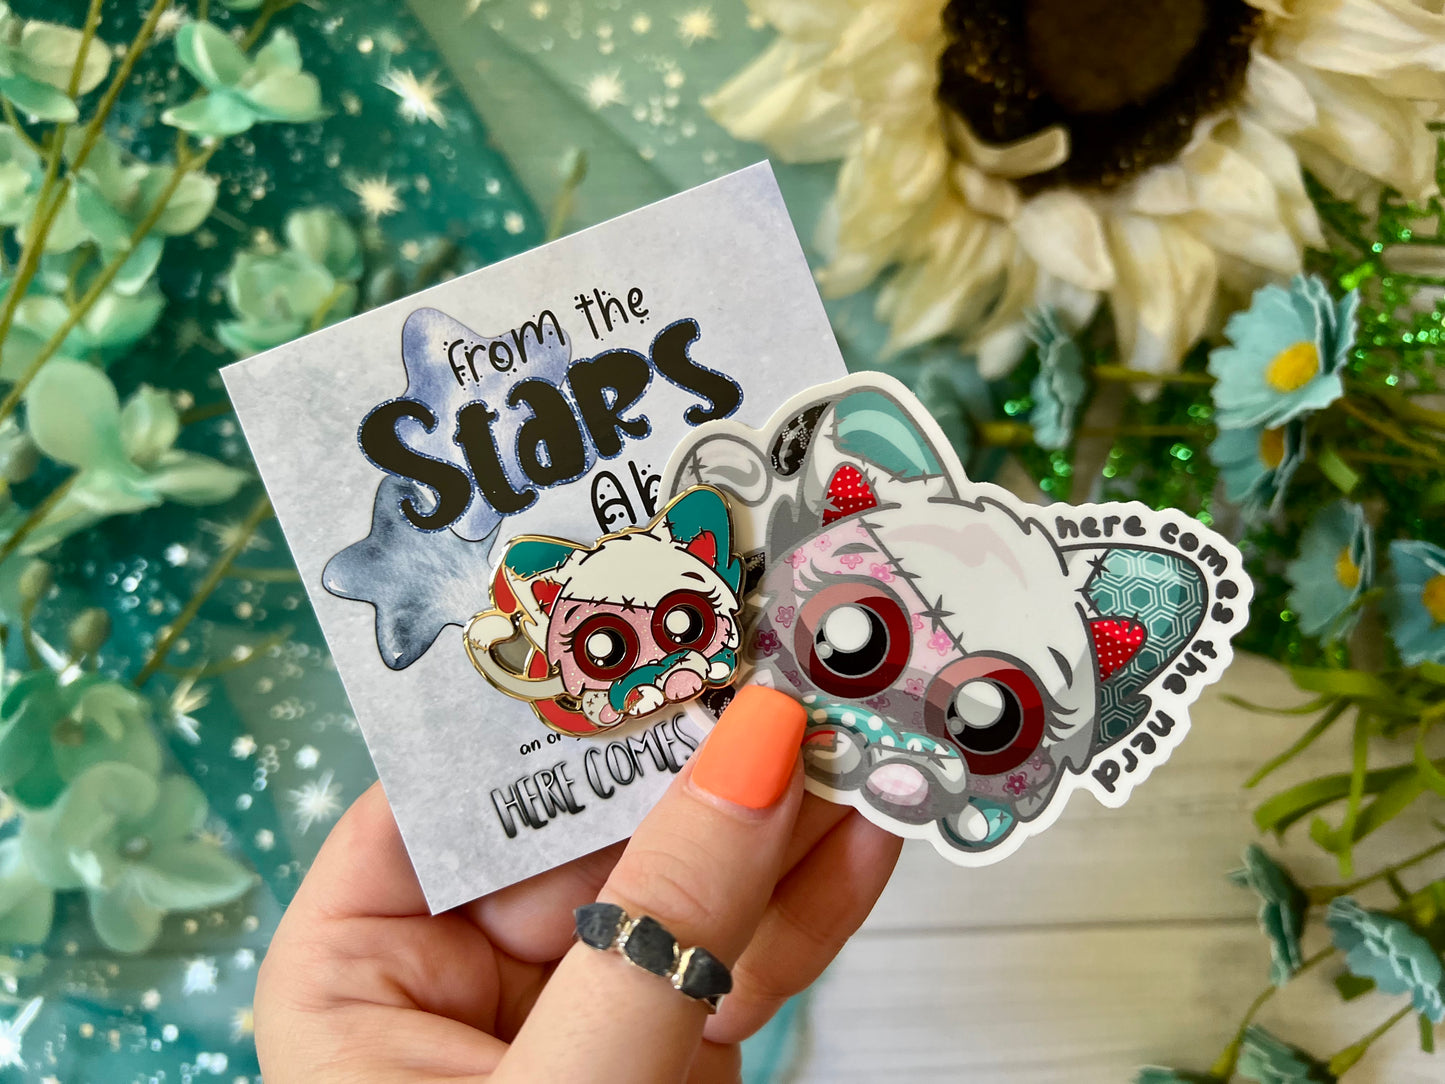 Mezzy, From the Stars Above* - Vinyl Sticker (FREEEEE Shipping!)